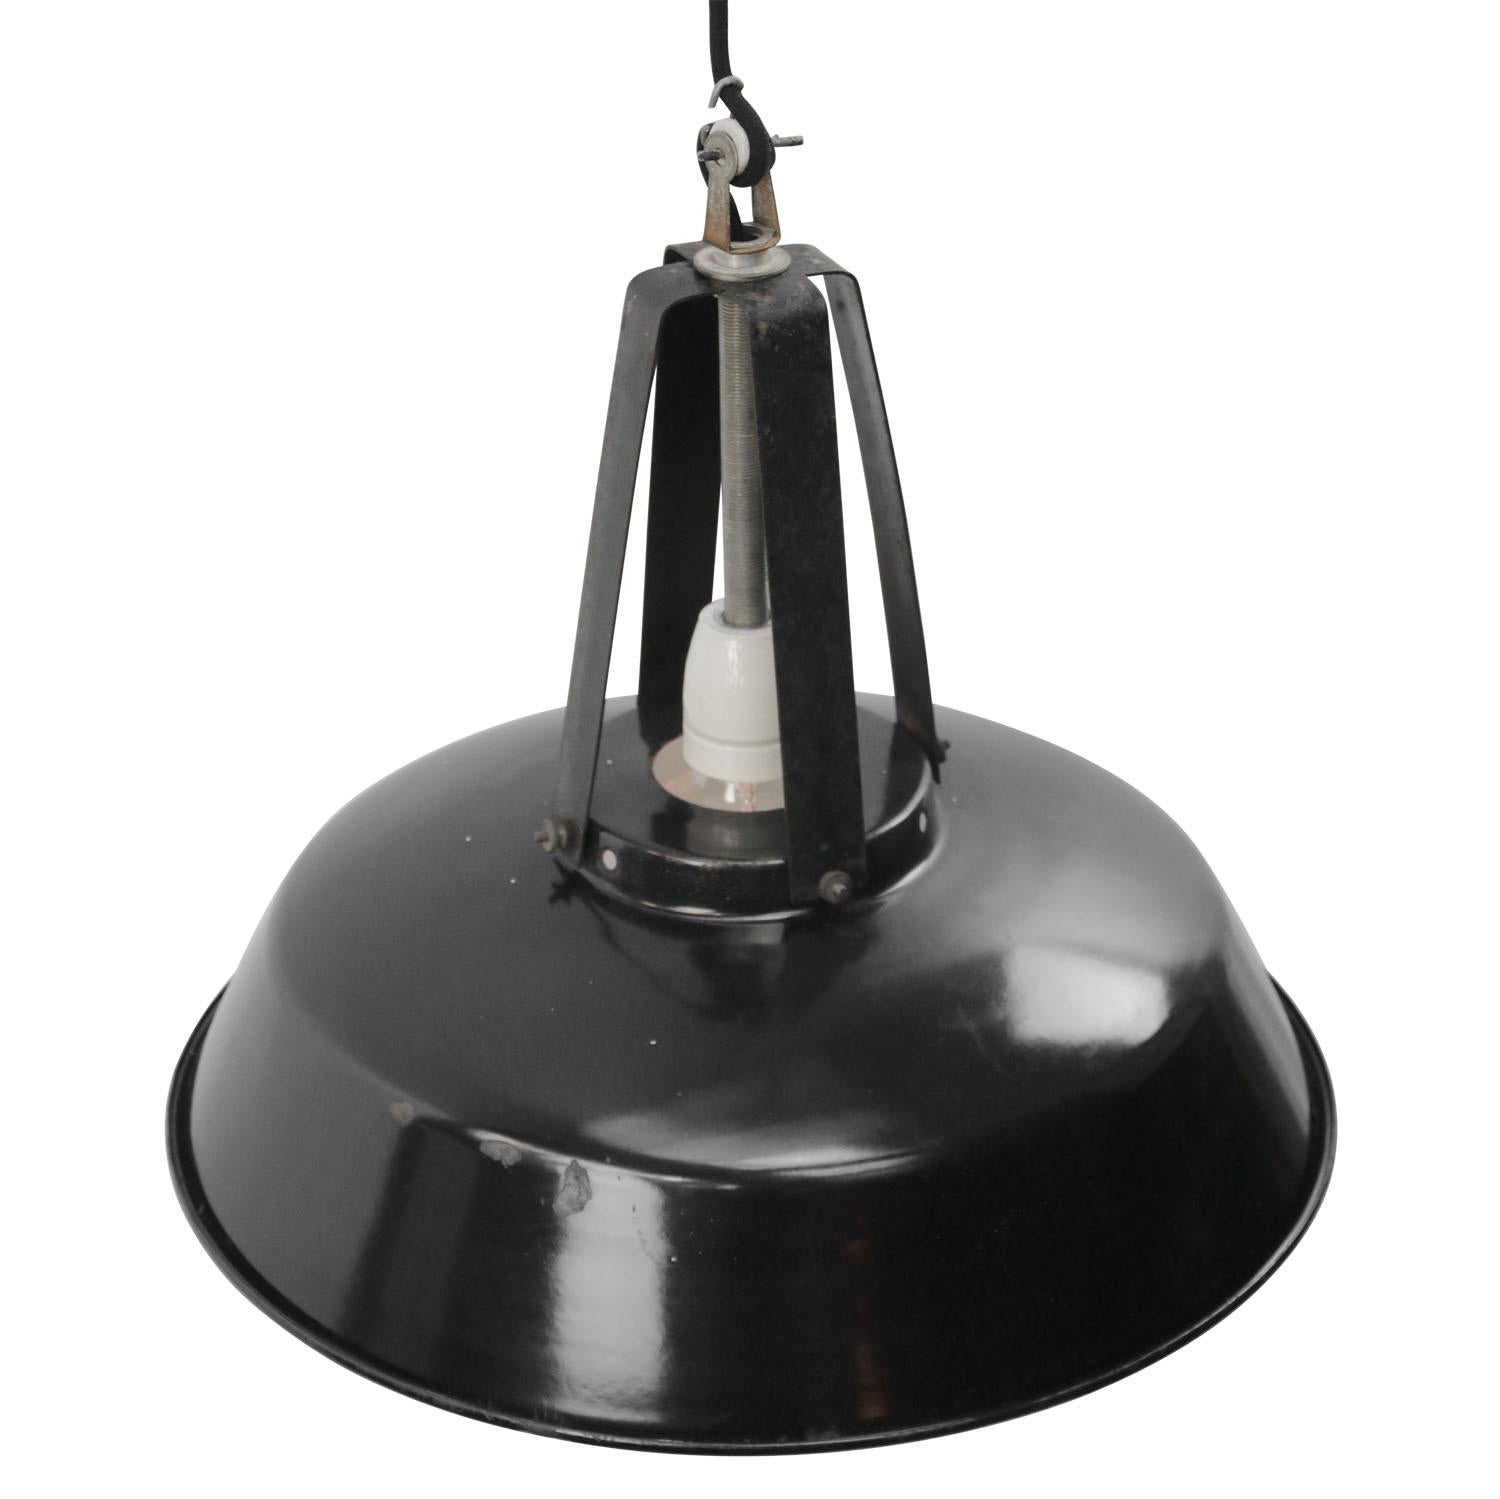 French factory light.
Black iron top with enamel shade.
White inside.

Weight: 2.00 kg / 4.4 lb

Priced per individual item. All lamps have been made suitable by international standards for incandescent light bulbs, energy-efficient and LED